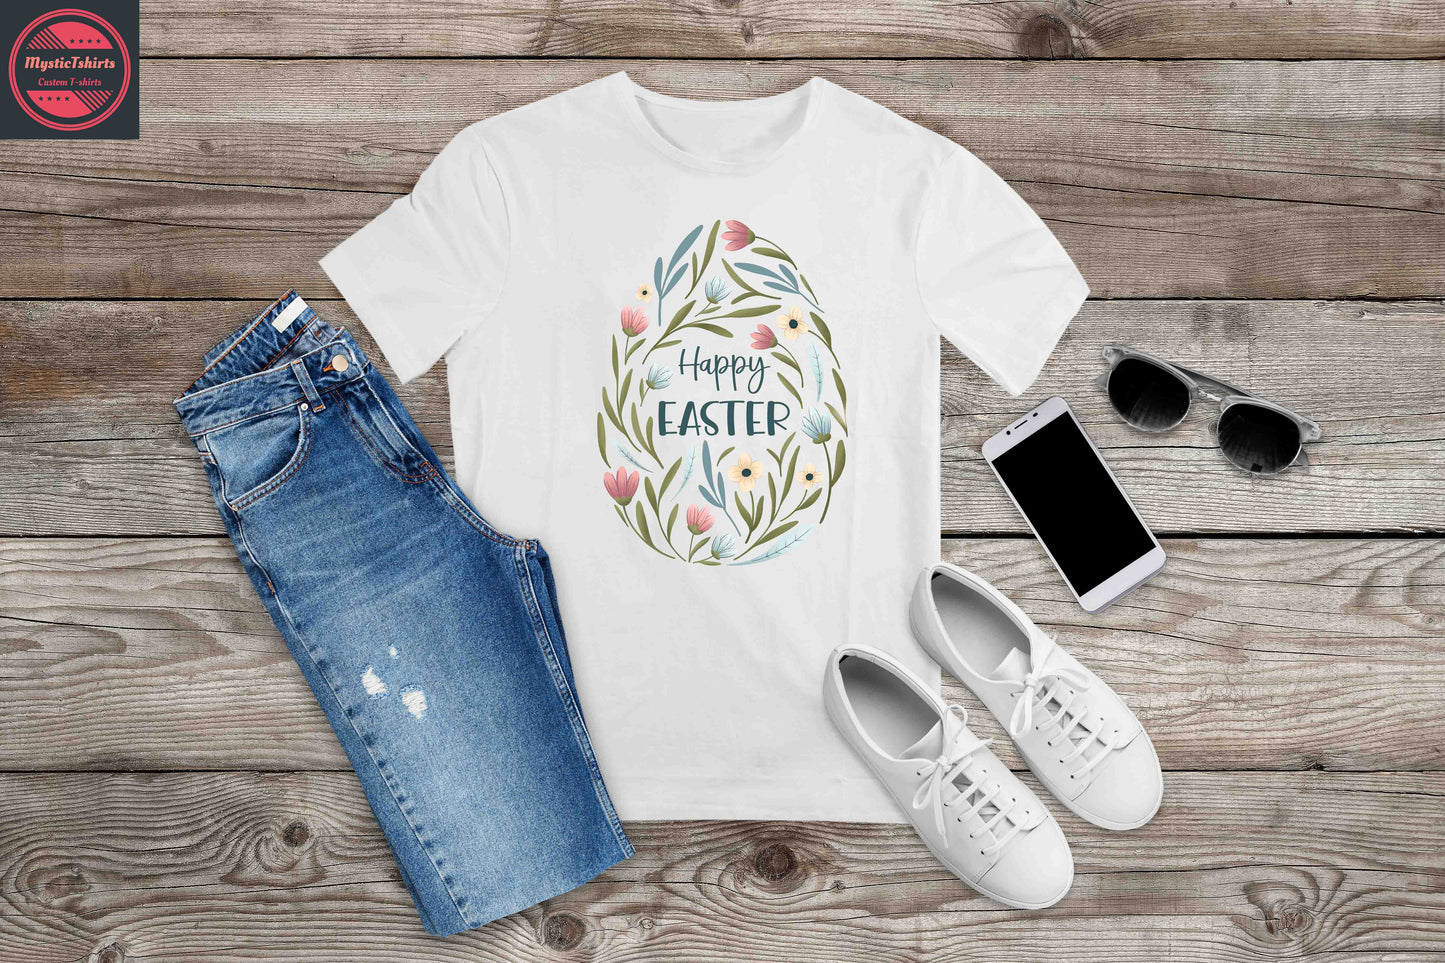 186. HAPPY EASTER, Custom Made Shirt, Personalized T-Shirt, Custom Text, Make Your Own Shirt, Custom Tee